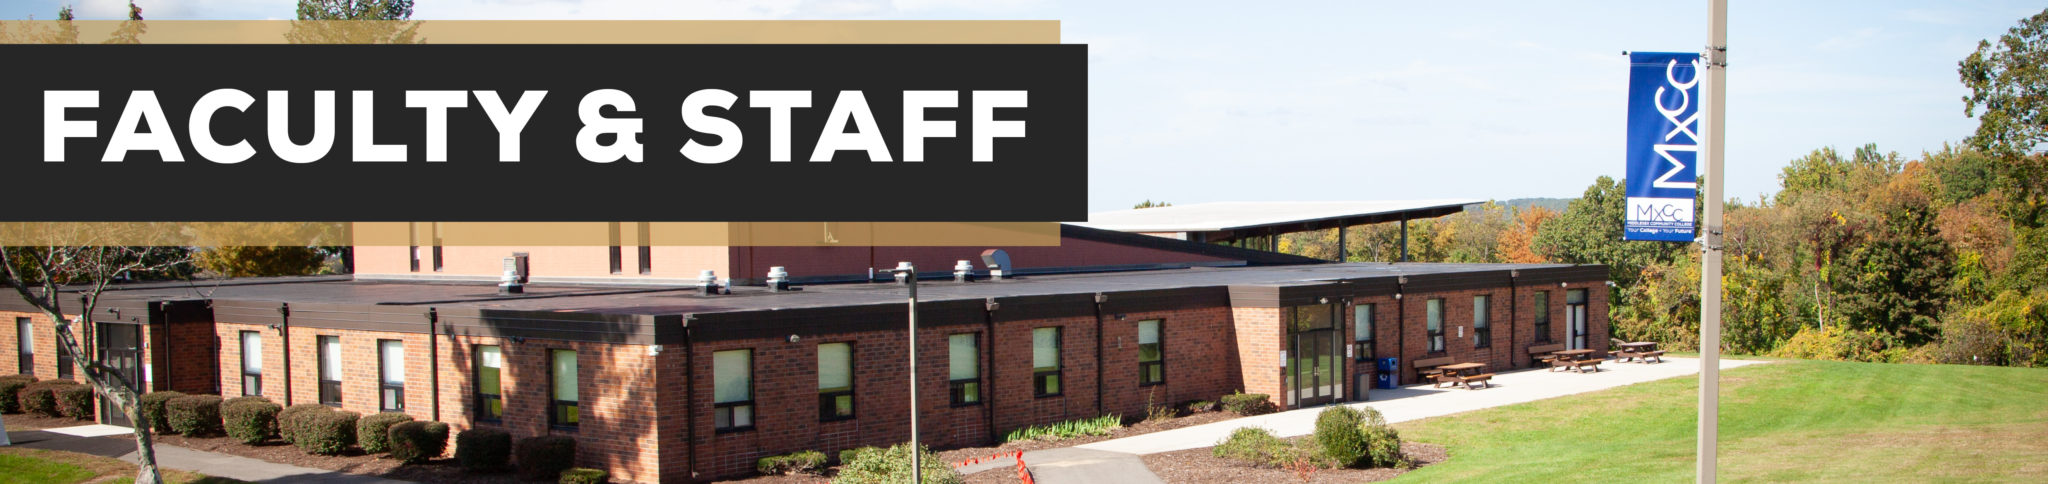 Faculty & Staff | CT State, Middlesex